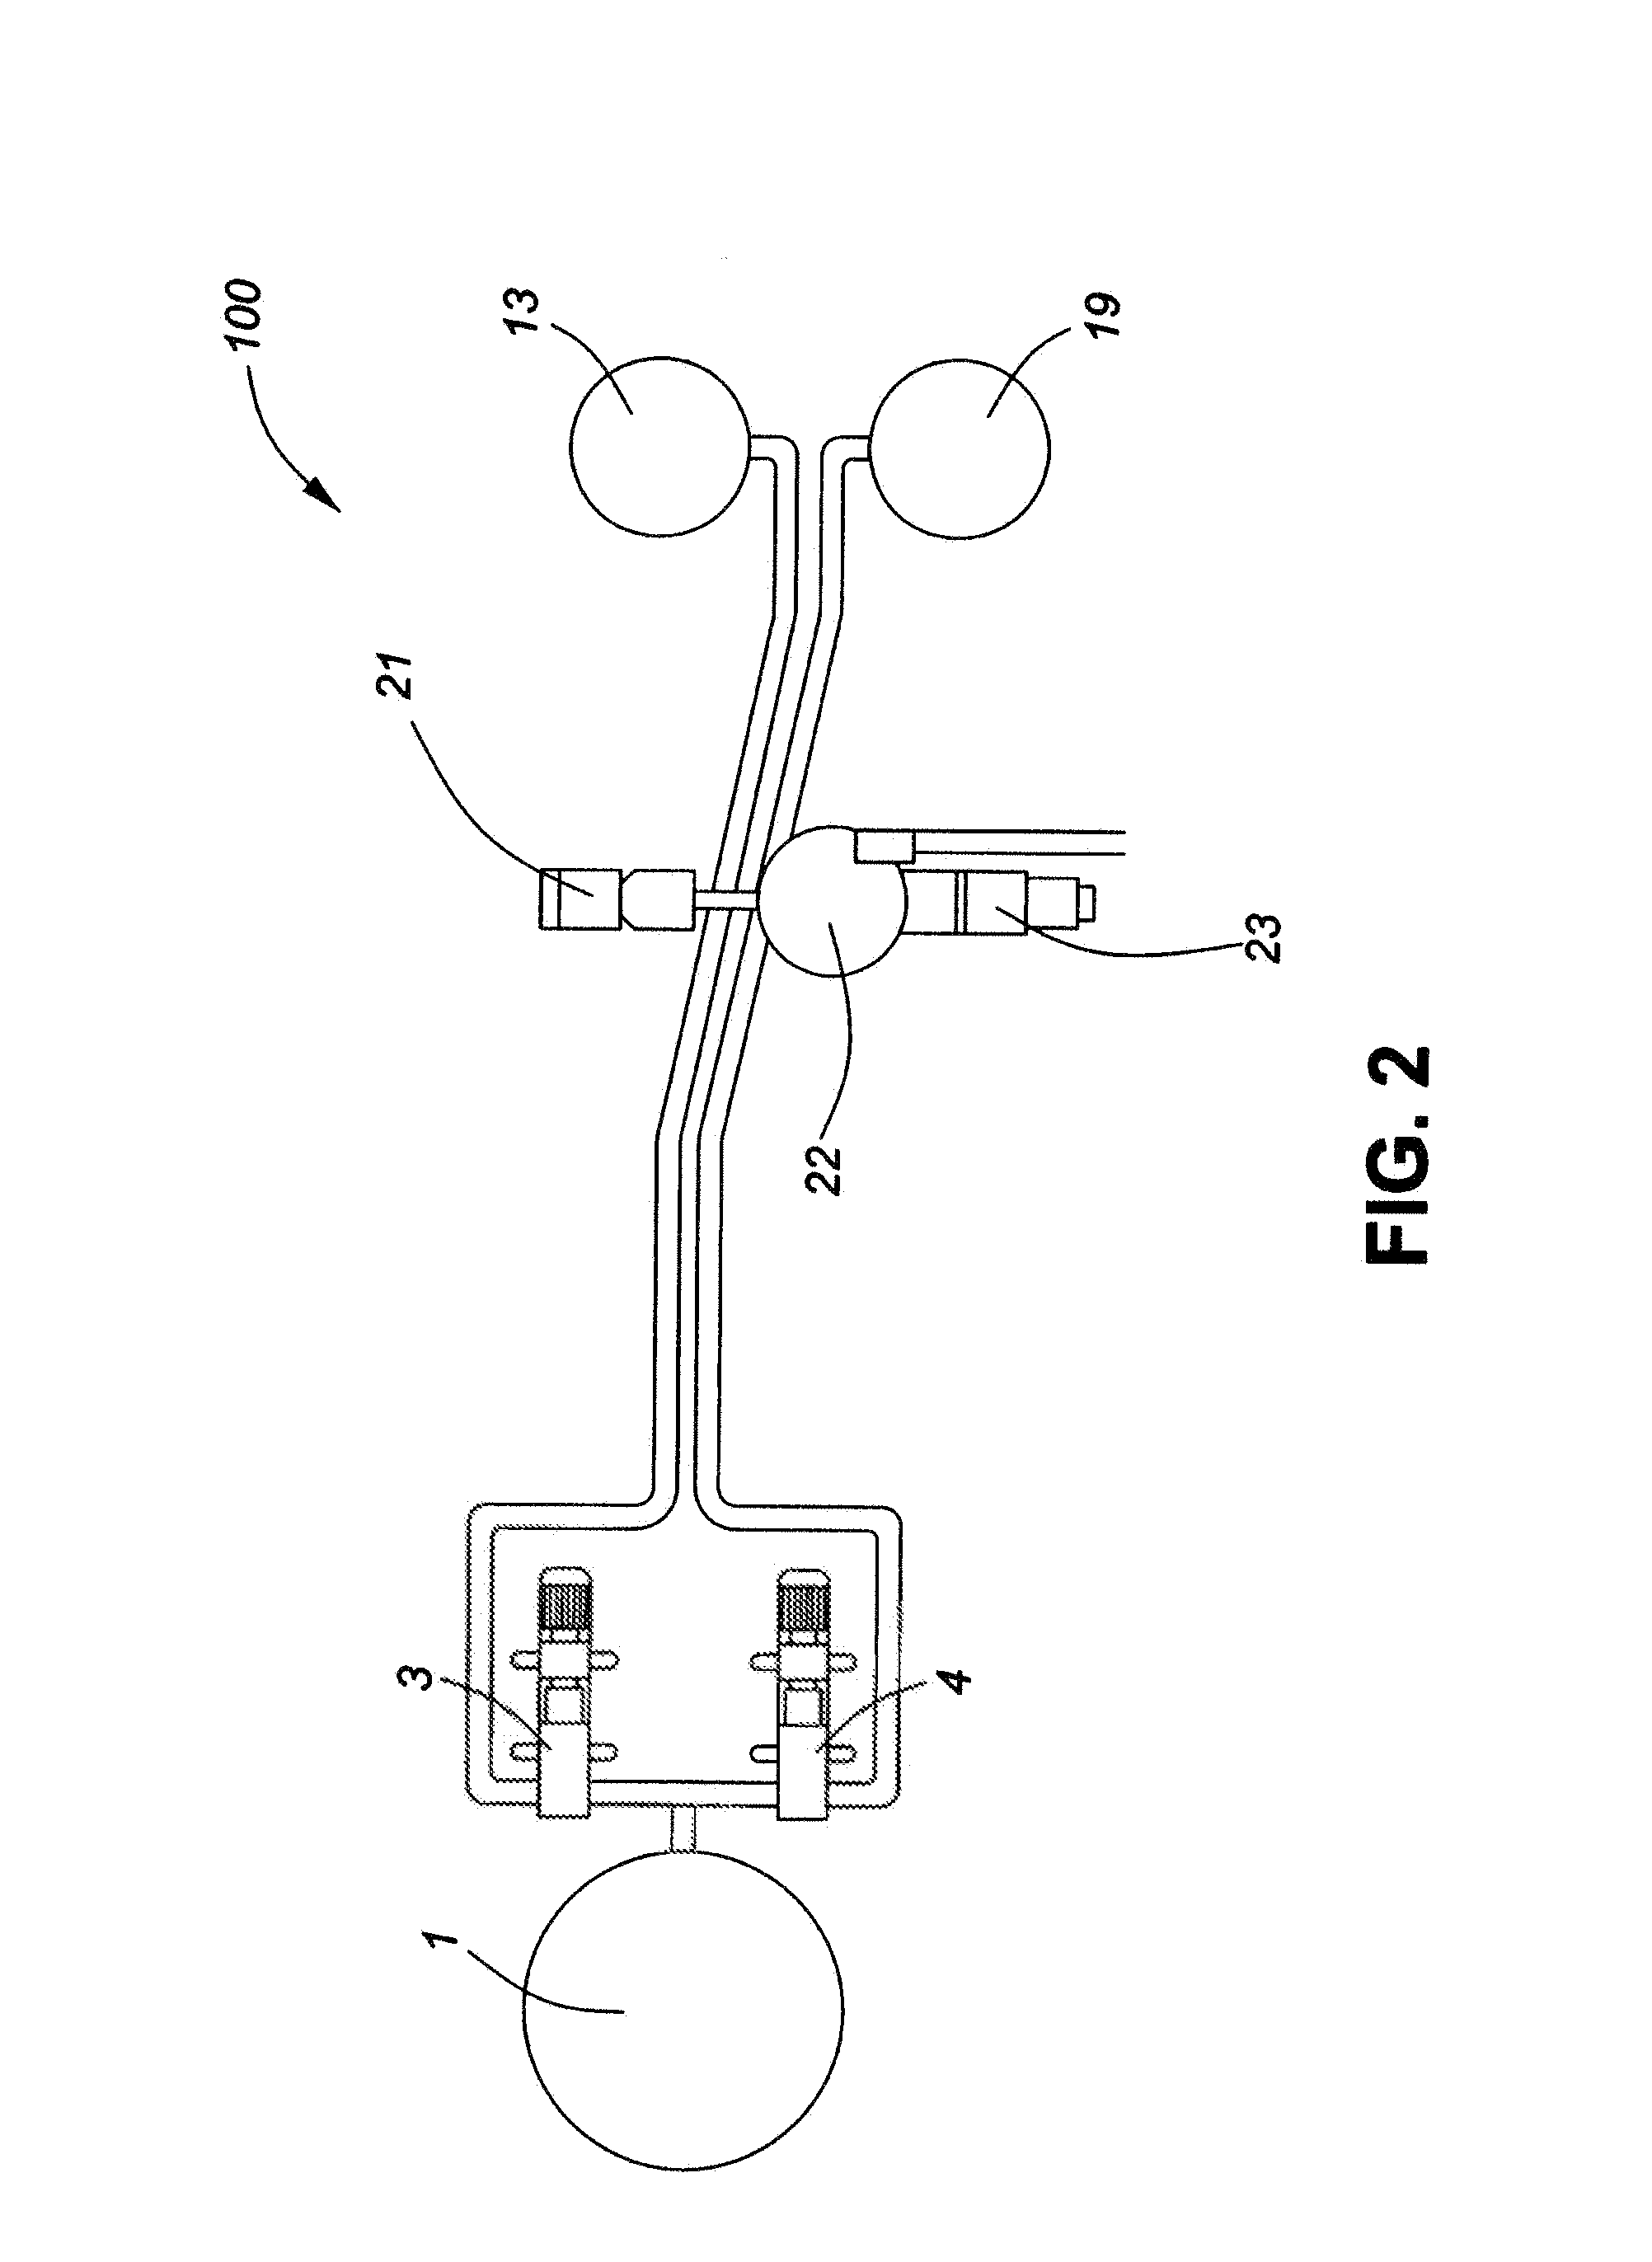 Method and System for Producing Viscous Fruit Product